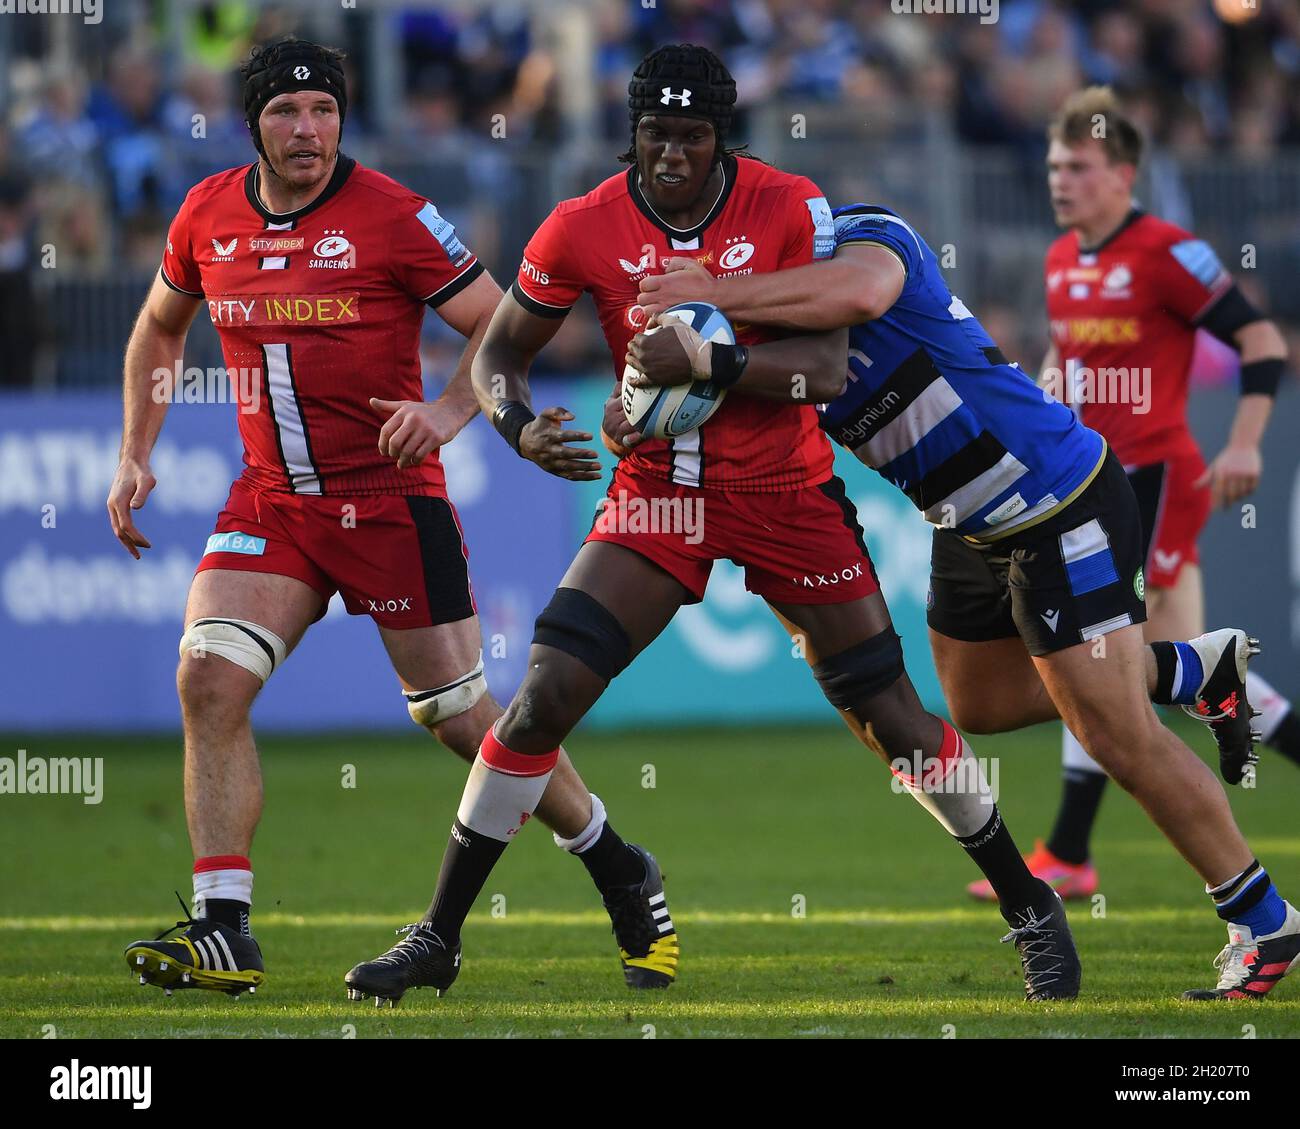 The Recreation Ground, Bath, England, UK. 17th October, 2021. Saracens' Maro Itoje is tackled by Bath Rugby's Will Stuart during the Gallagher English Premiership match between Bath Rugby and Saracens: Credit: Ashley Western/Alamy Live News Stock Photo